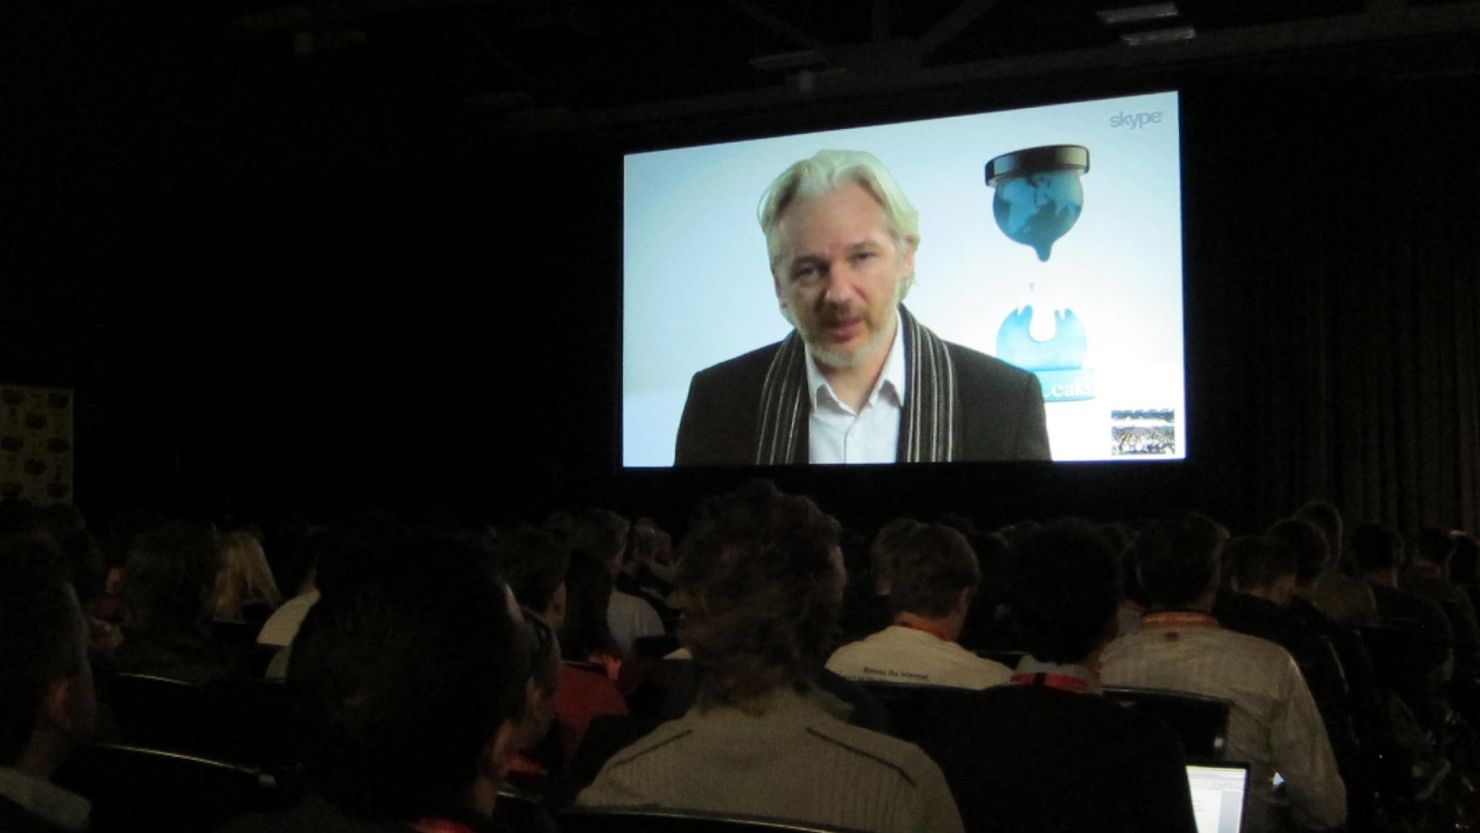 Exiled WikiLeaks founder Julian Assange addressed the SXSW audience in Austin, Texas, via livestream from London.